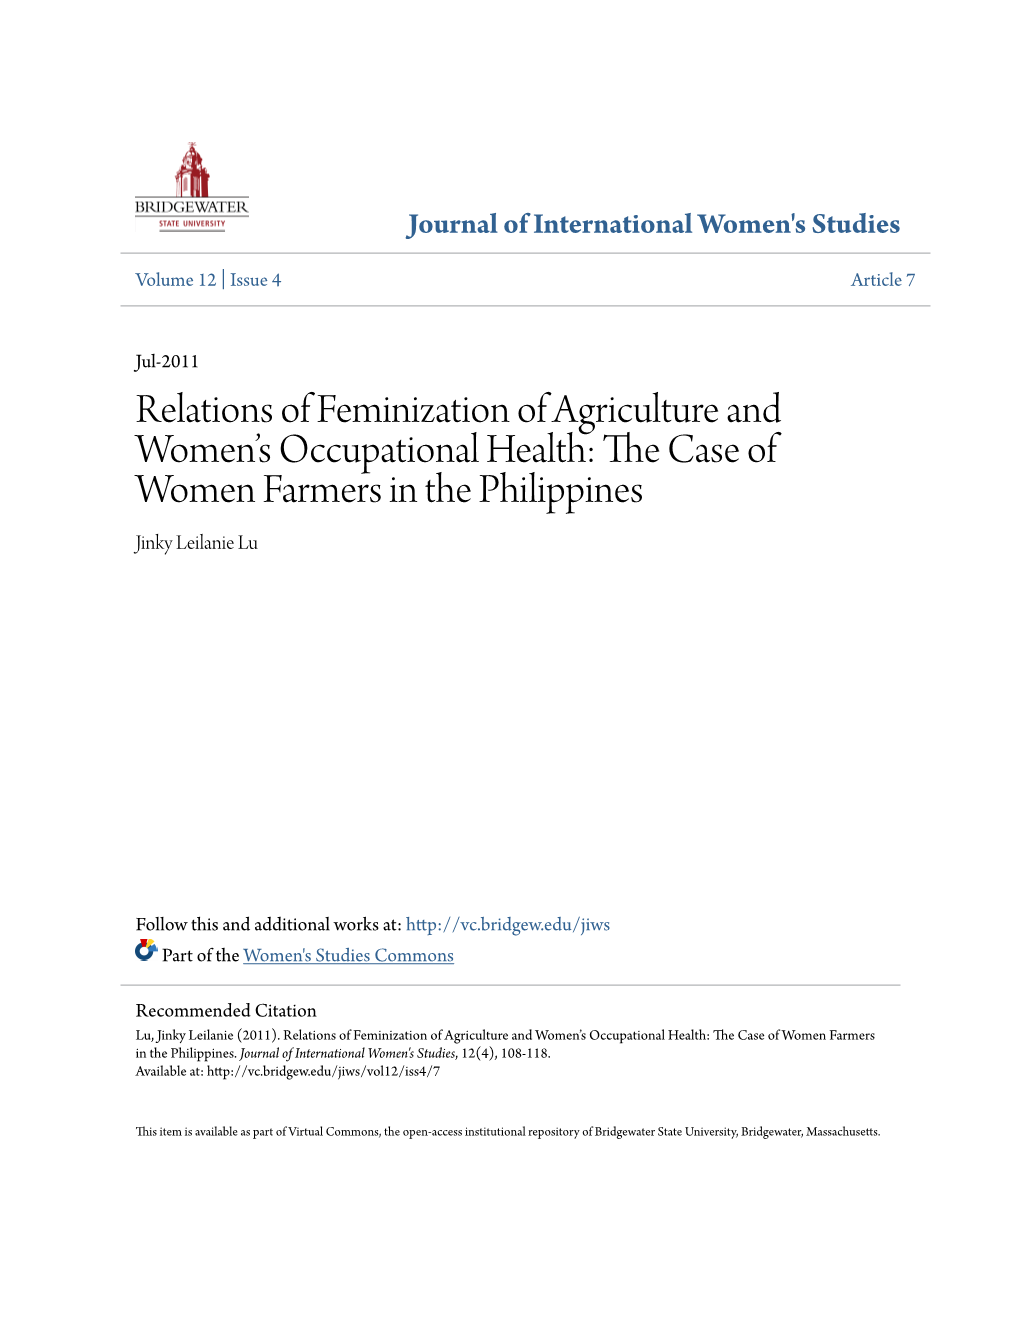 Relations of Feminization of Agriculture and Women's